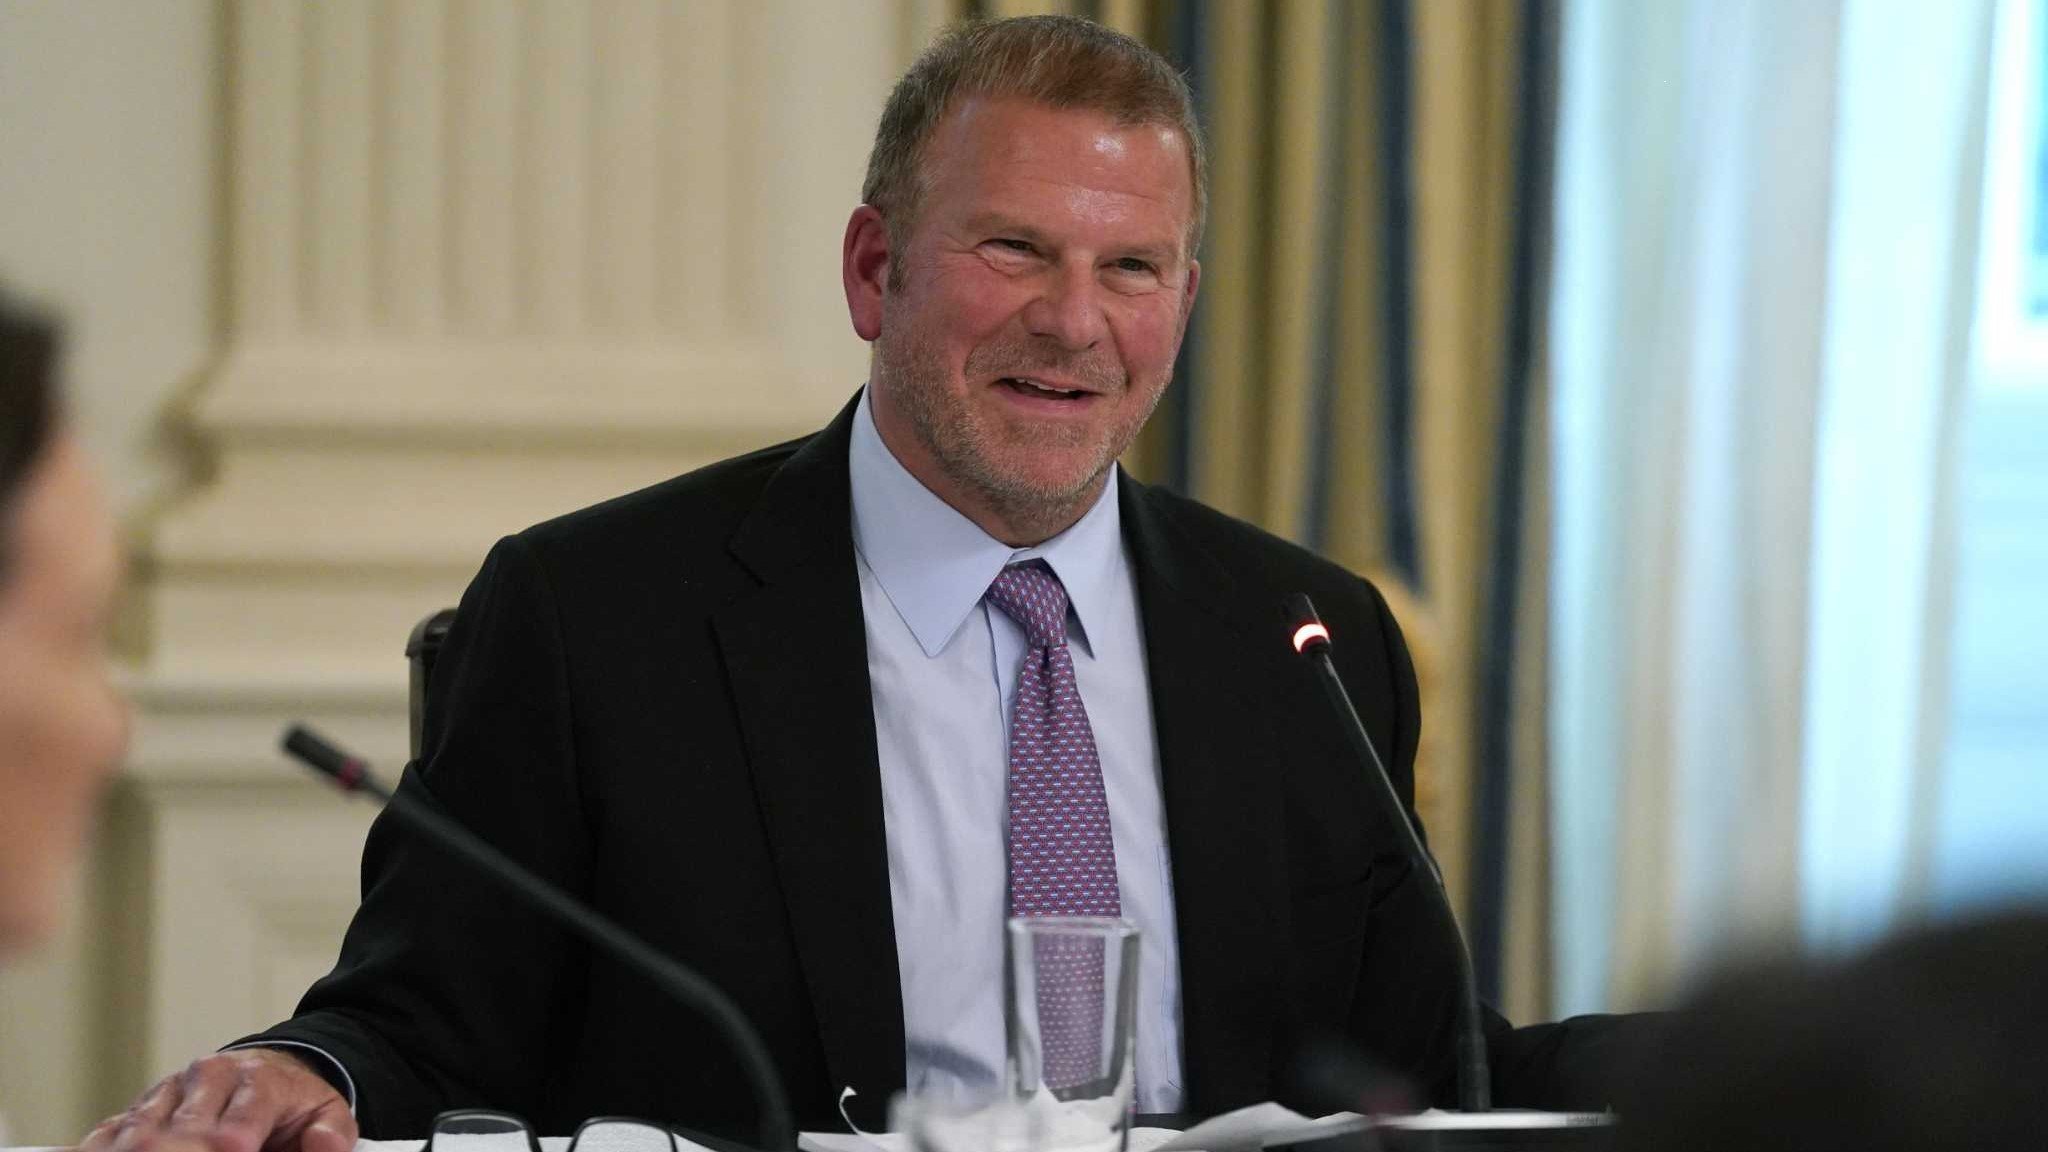 Tilman Fertitta acquires 6.1% stake in Wynn Resorts; becomes company’s second-largest shareholder